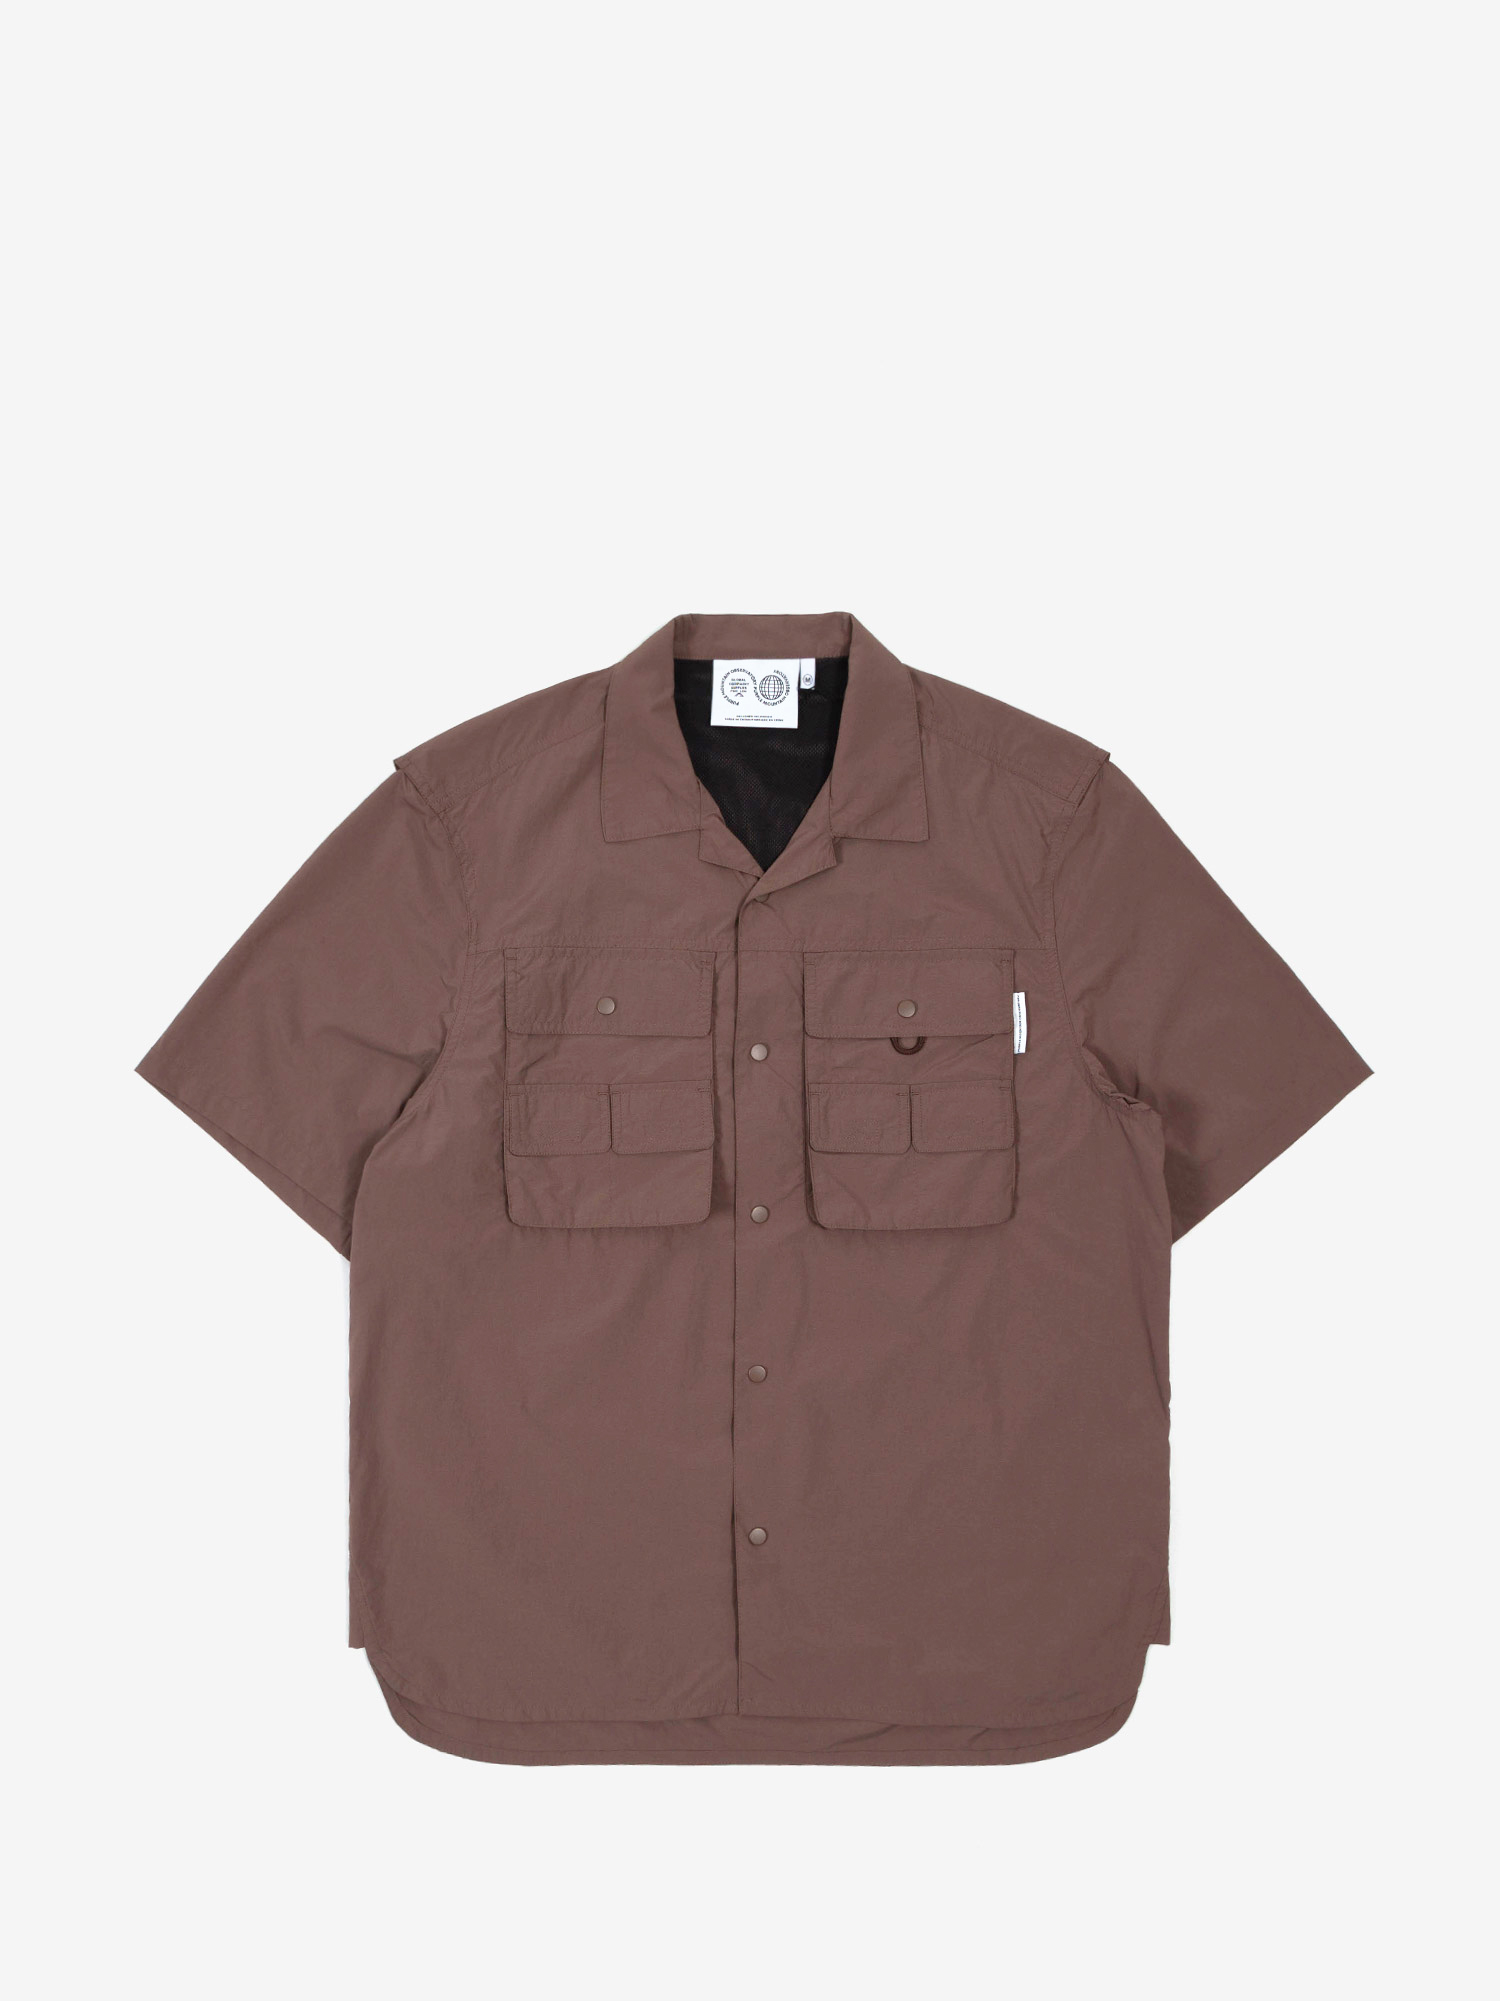 Featured image for “TRAIL MULTI POCKET SHIRT CHOCOLATE”